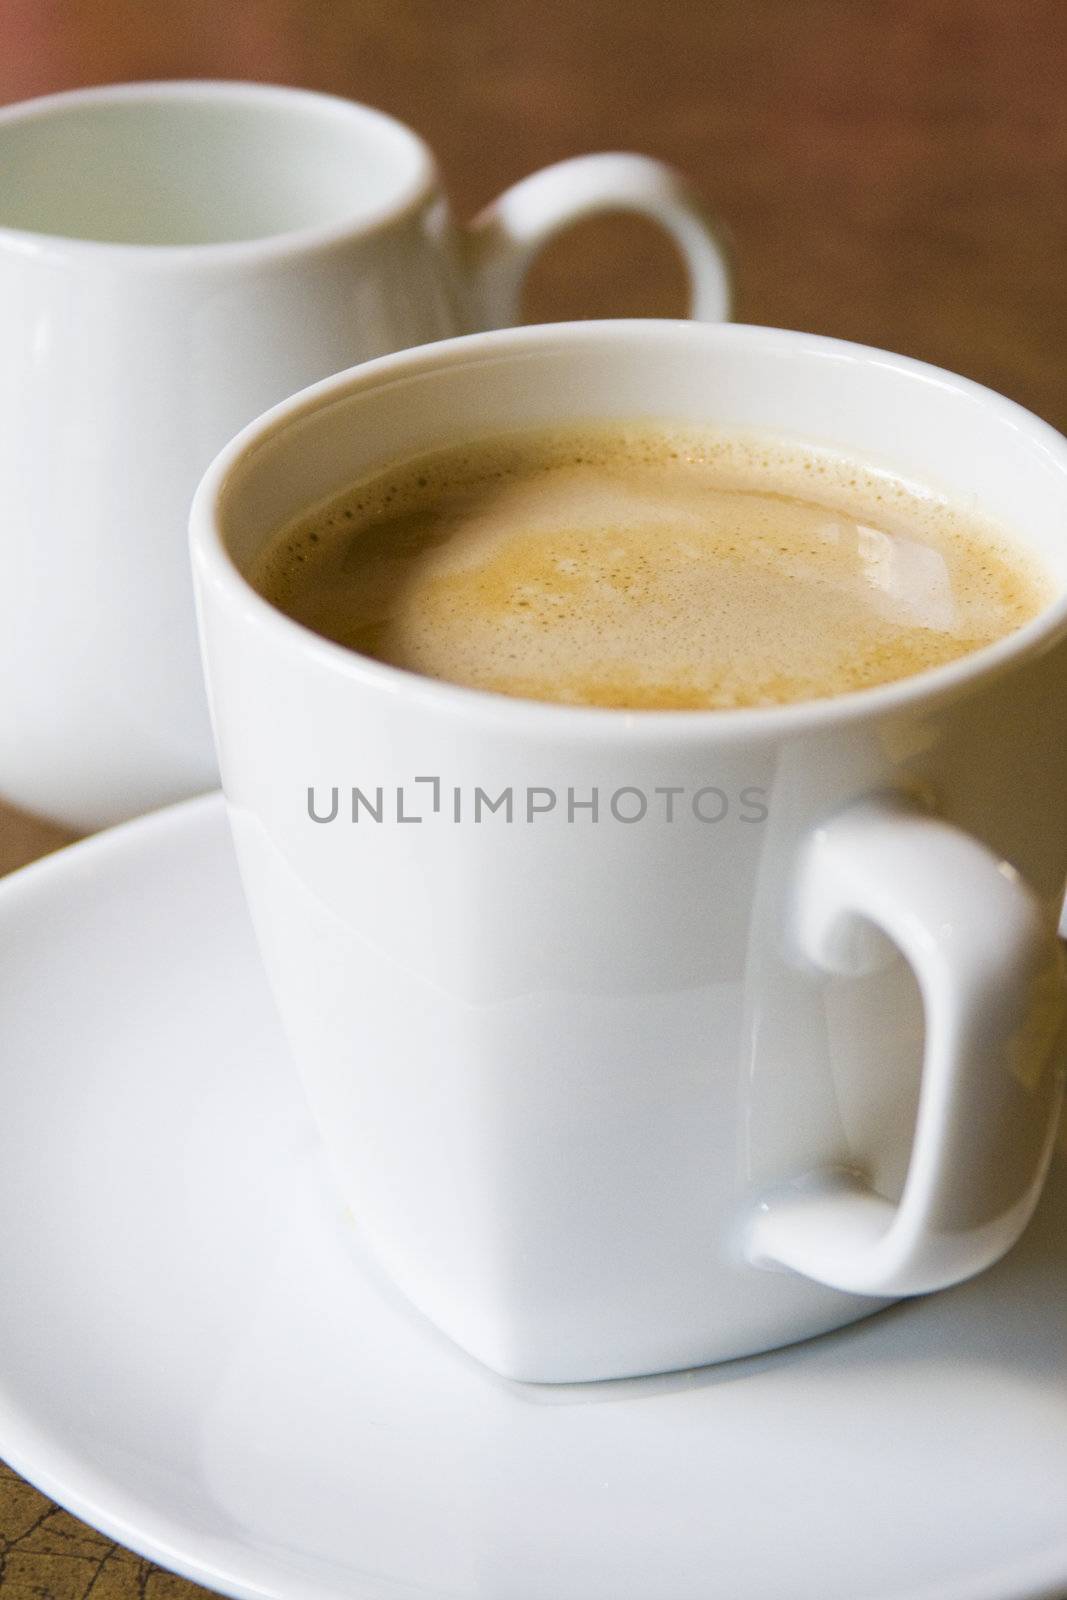 Image of a cup of coffee.